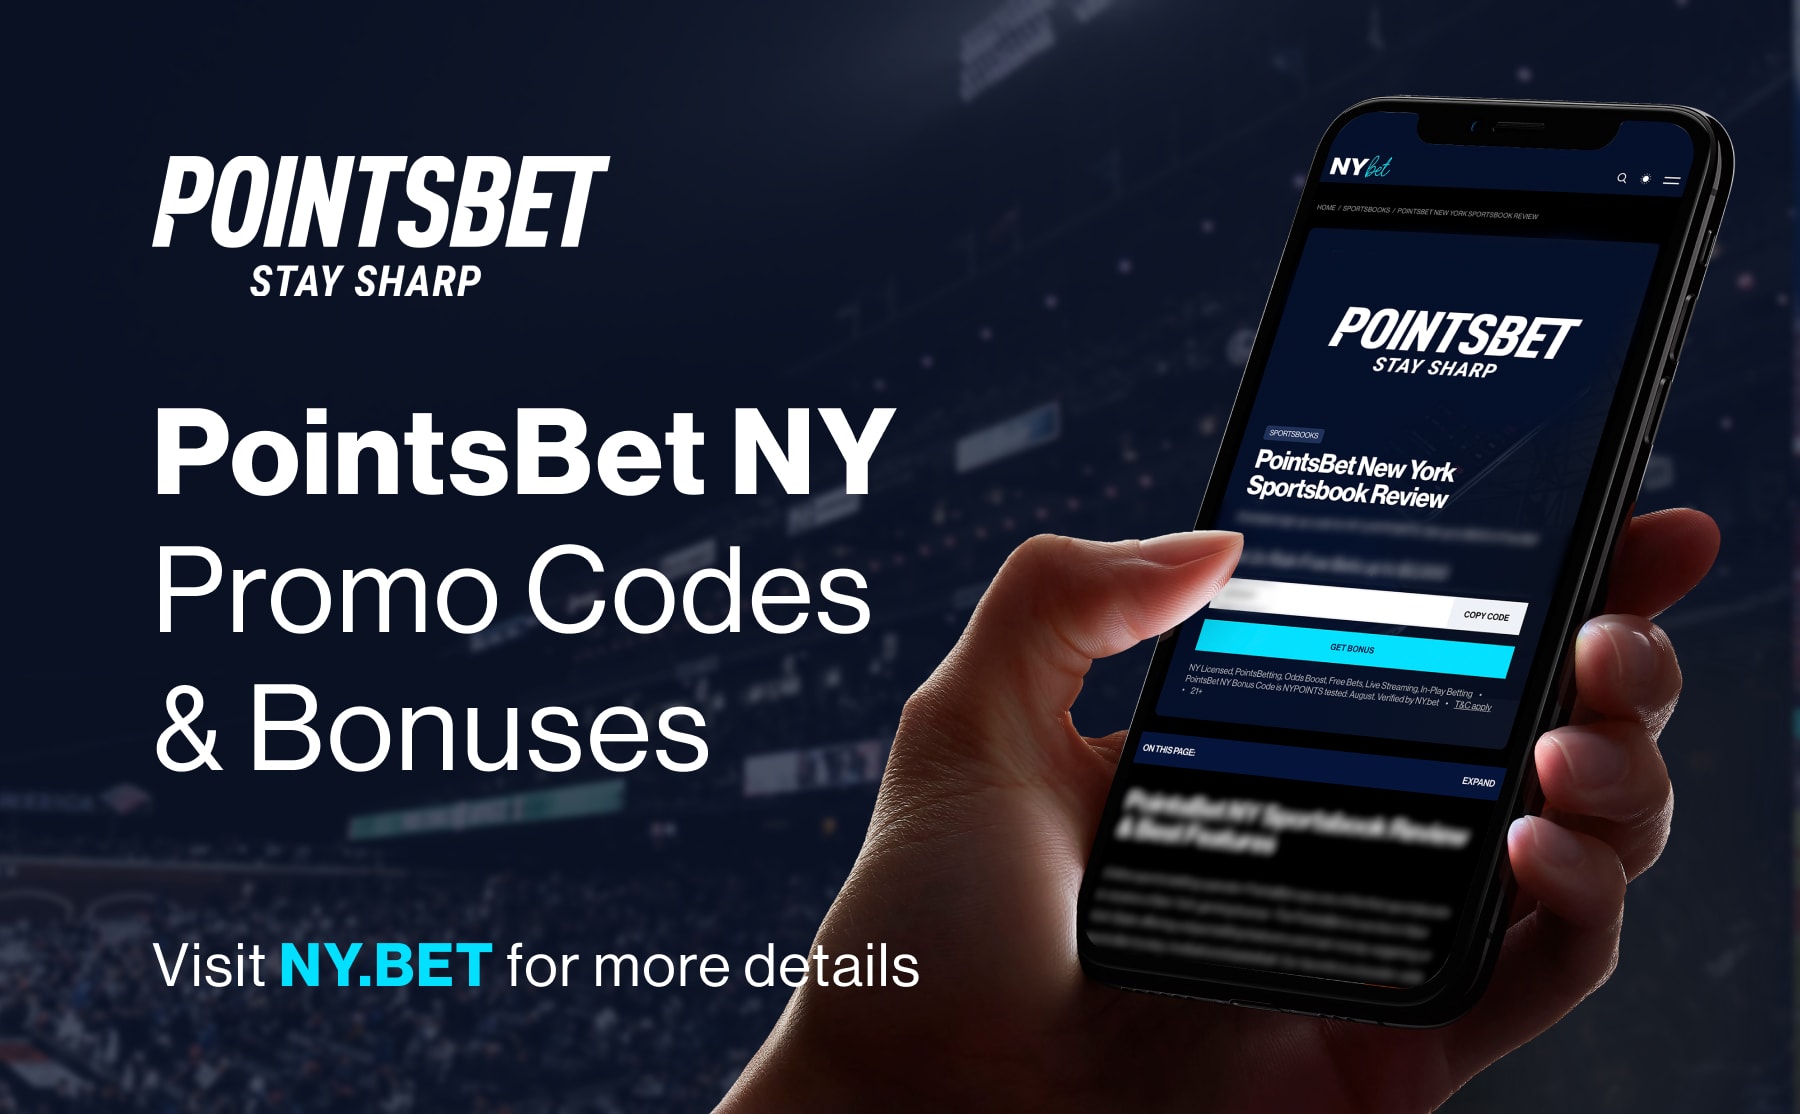 Excitement in the Empire State - POINTSBET